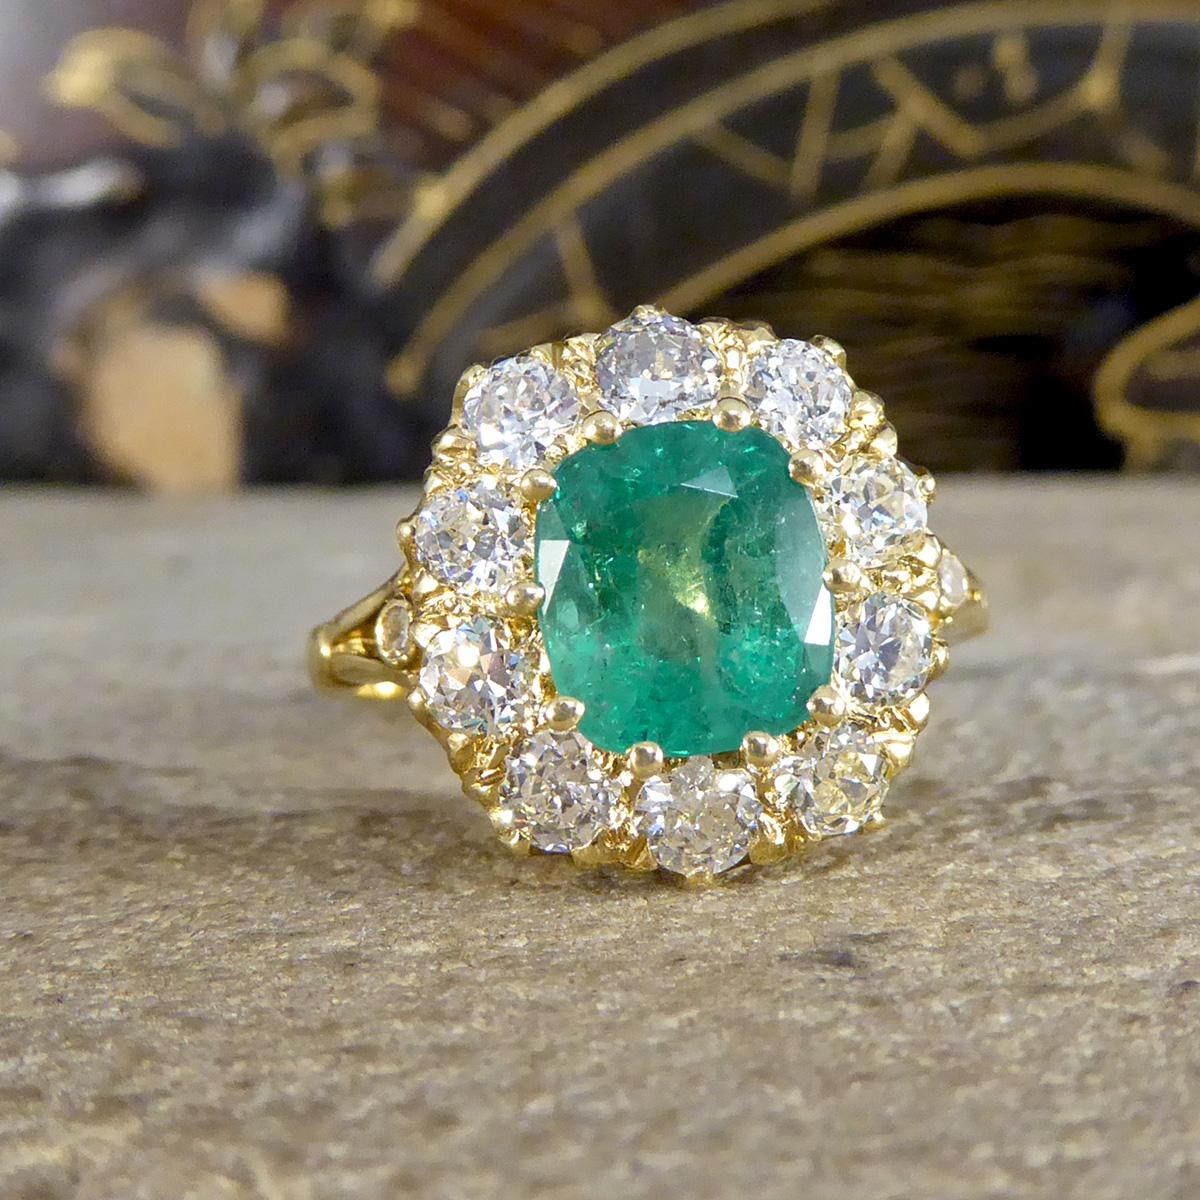 This beautiful ring features an Emerald weighing 1.82ct held securely into place with a ten claw gold setting. The Emerald bright in colour with regular Emerald flaws and is surrounded by 10 Old European cut Diamonds weighing 1.20ct in total, with